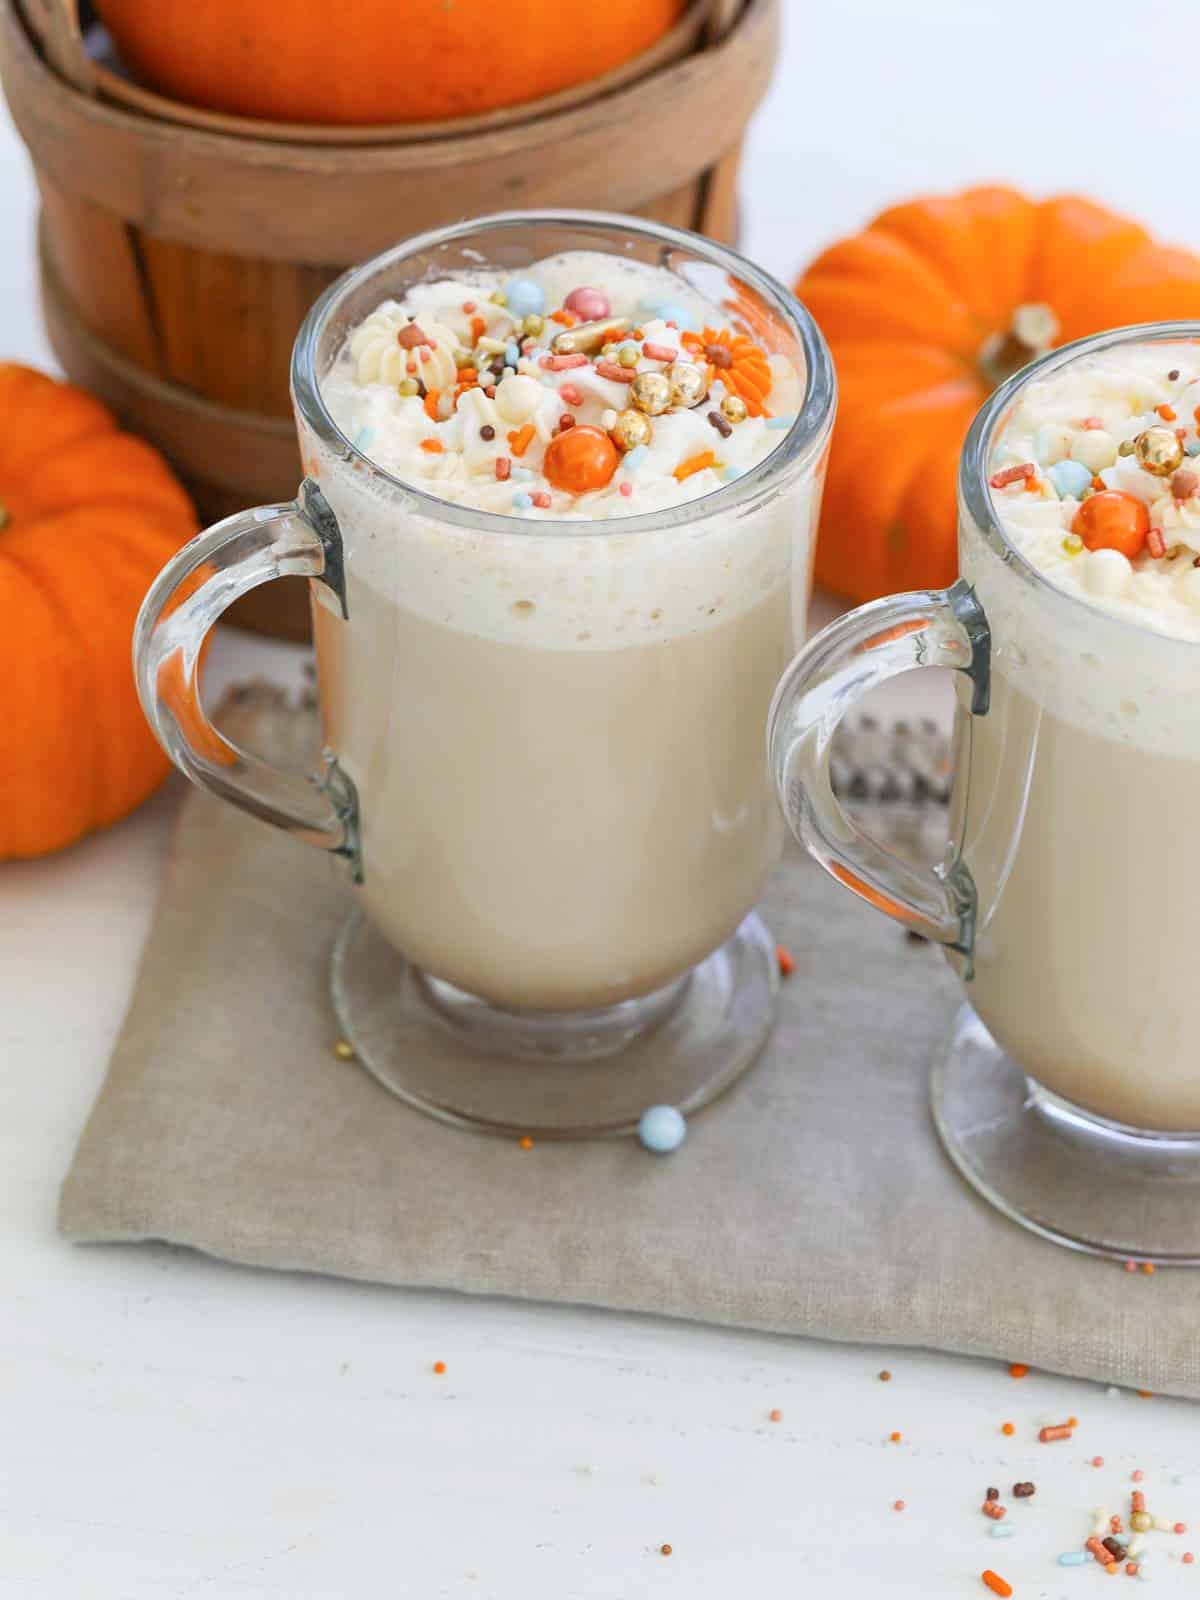 Two mugs of Pumpkin Spice Latte with Fall sprinkles on top of whip cream.